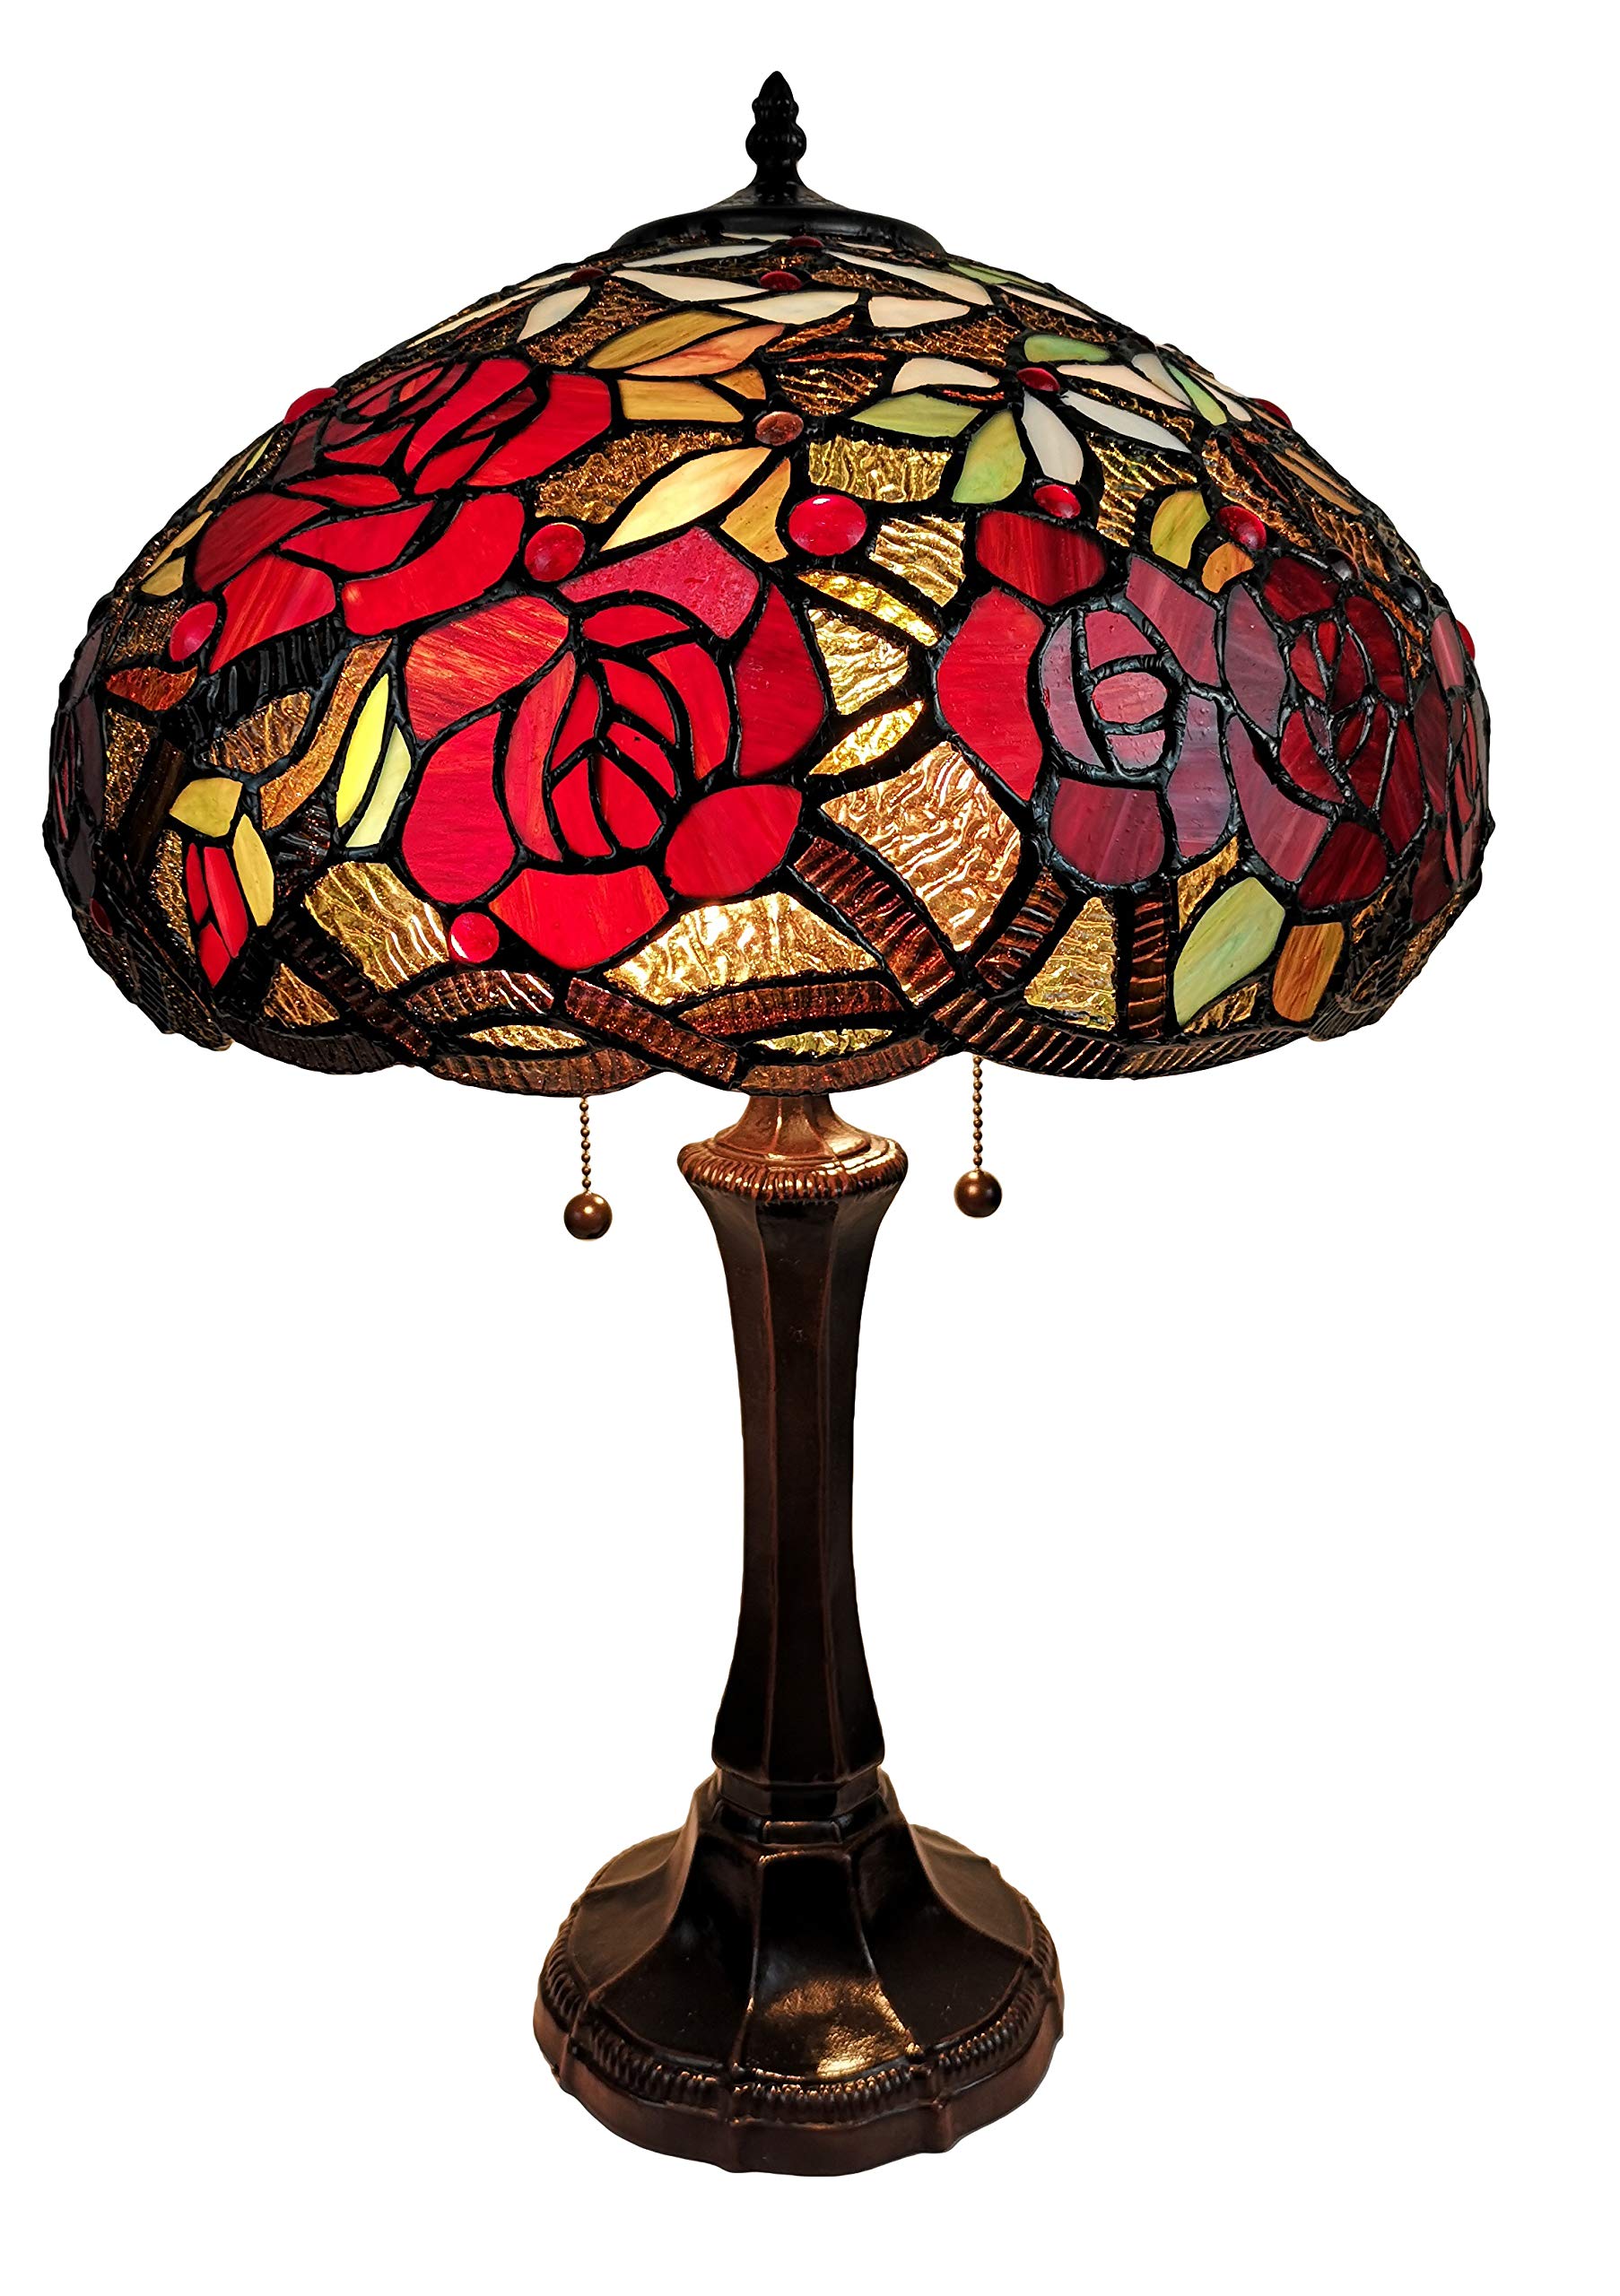 Amora Lighting Tiffany Style Table Lamp Banker 24" Tall Stained Glass Yellow Brown Red Floral Roses Vintage Light Décor Nightstand Living Room ...